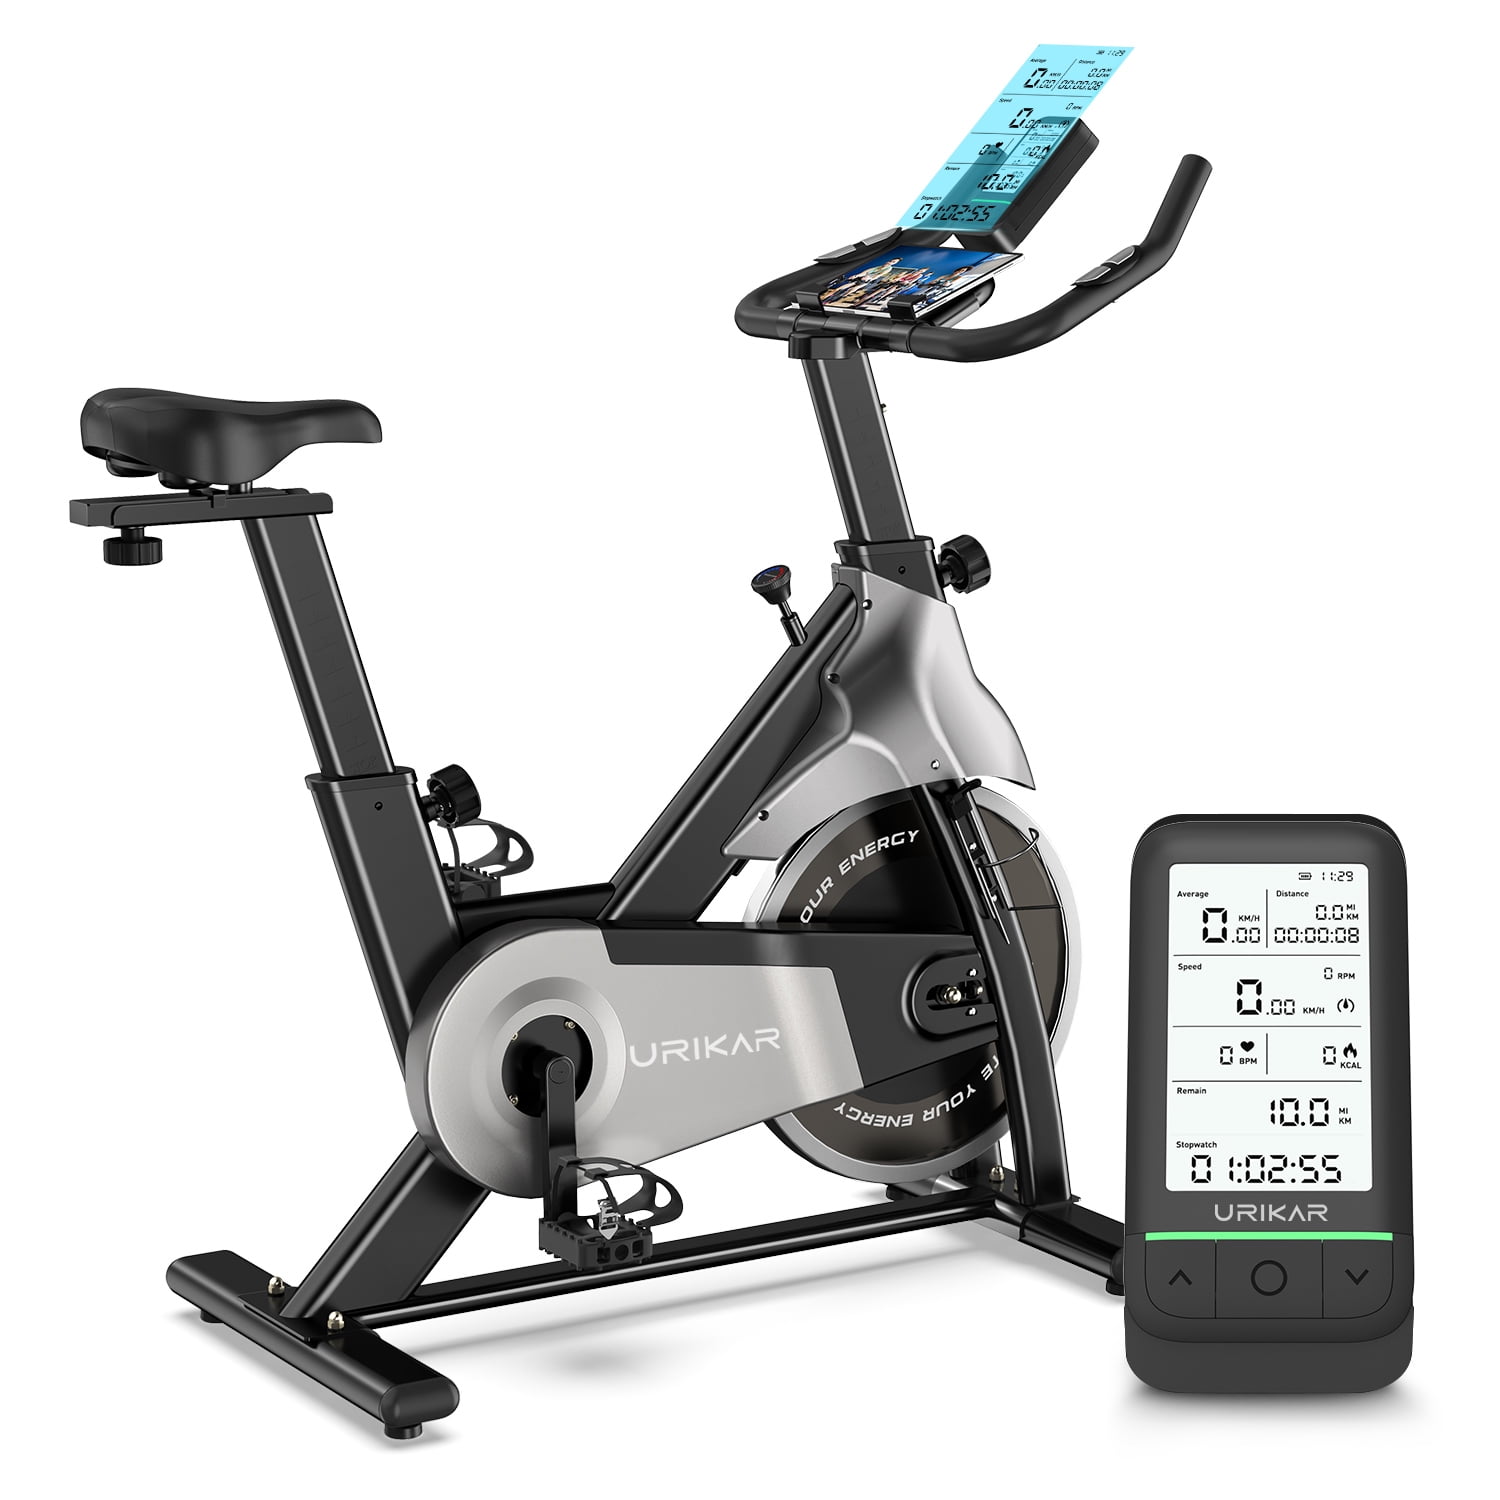 Indoor Studio Bike-Training Fitness Exercise_tablet holder Home Gym Bicycle 